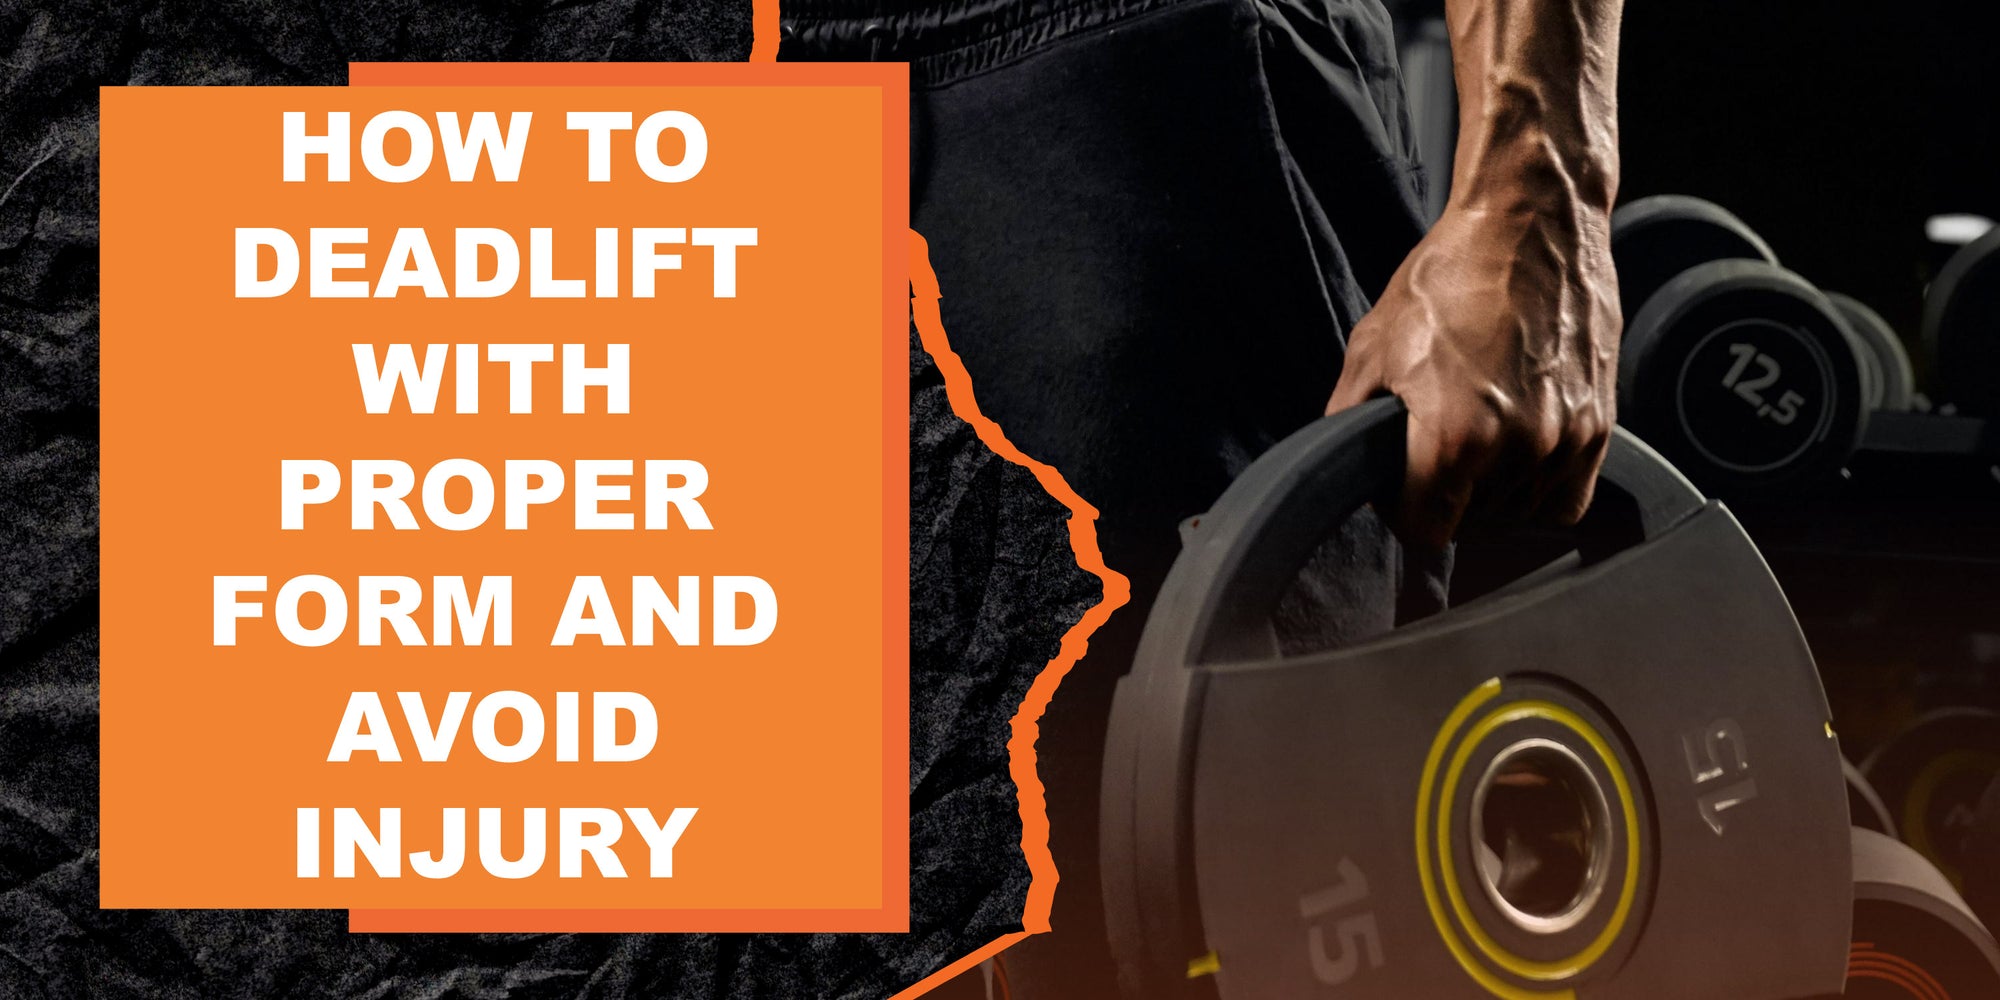 How to Deadlift With Proper Form and Avoid Injury